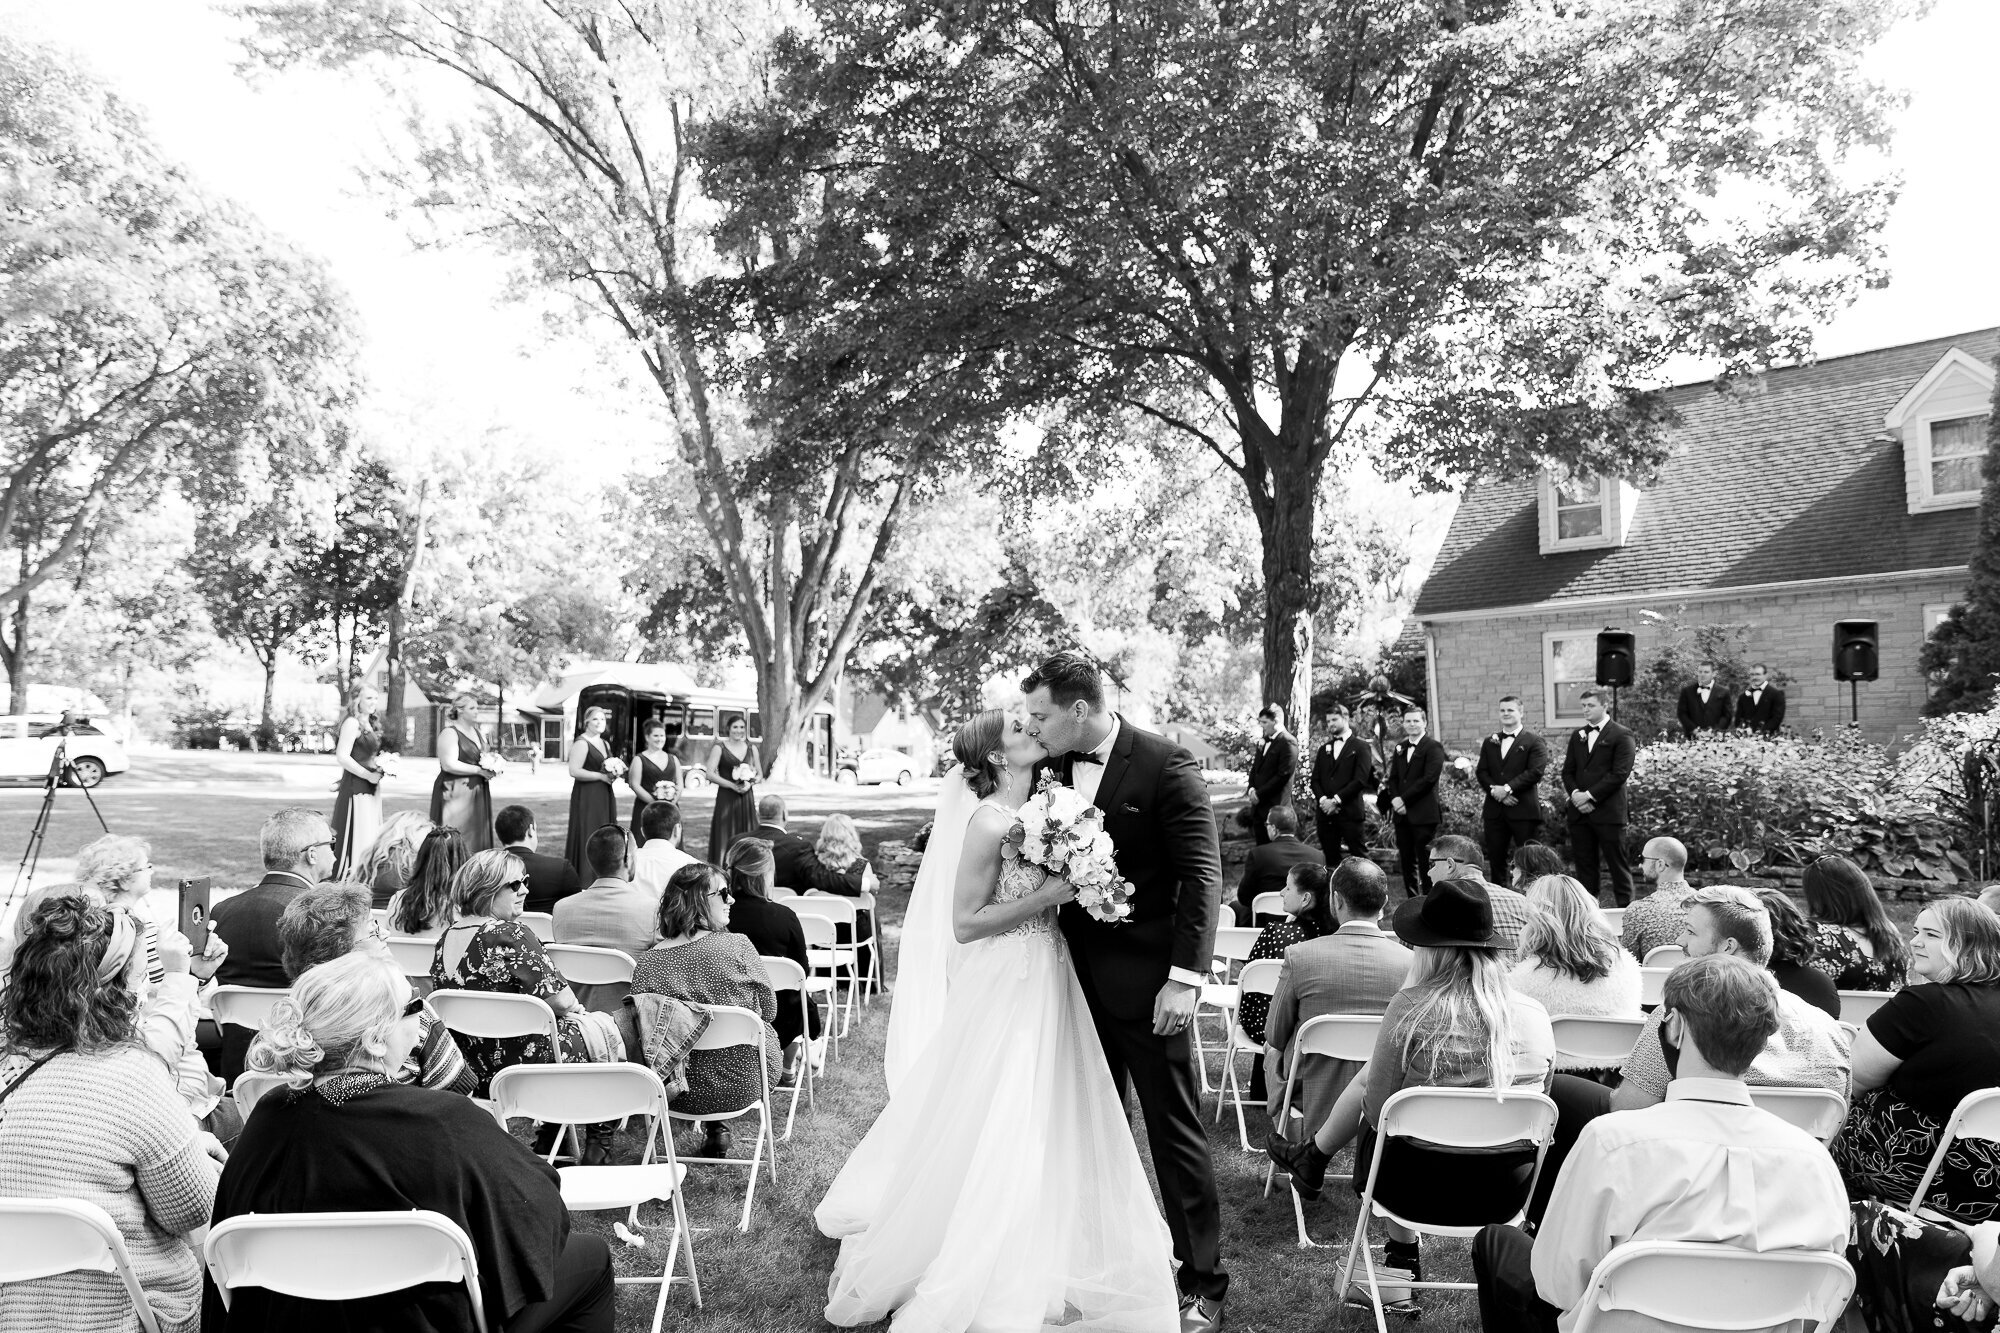 Outdoor+Private+Wedding+in+Ripon,+Wisconsin+-+Whit+Meza+Photography.jpeg